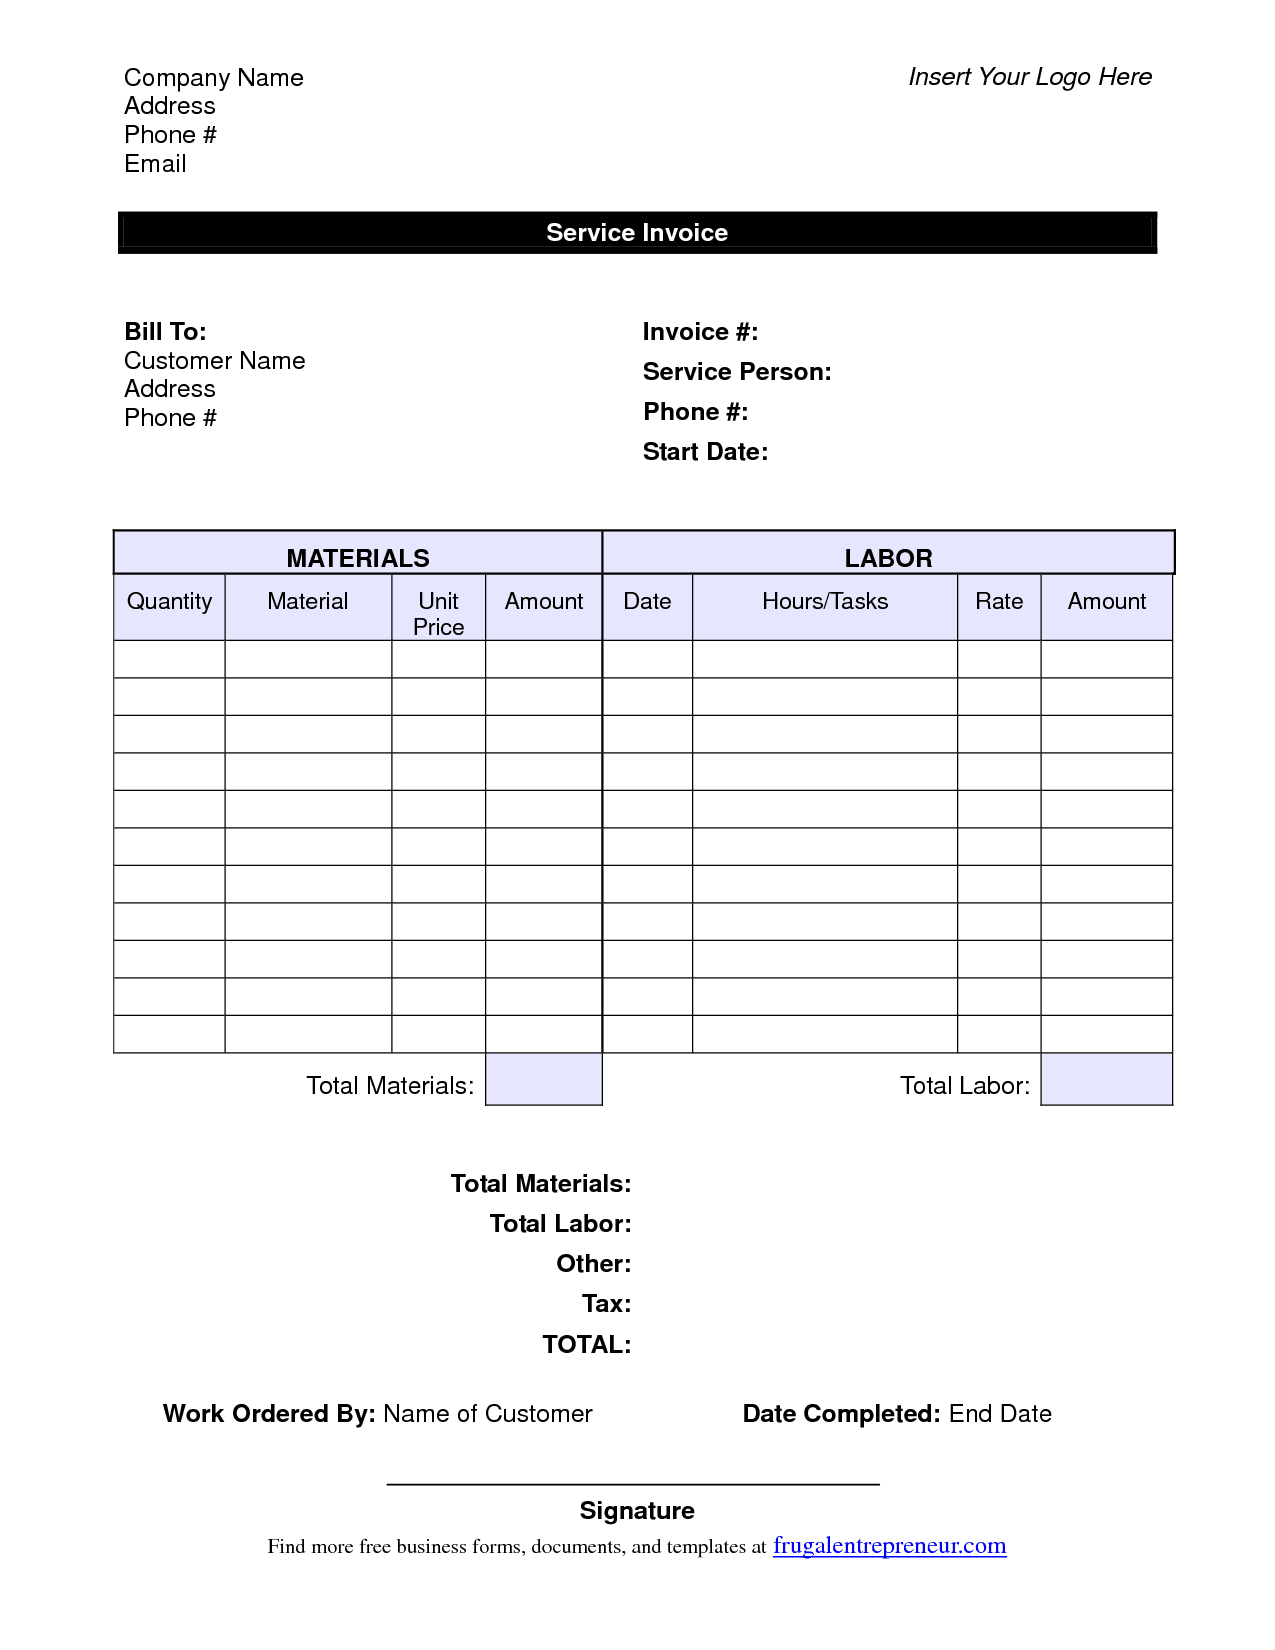 general-labor-invoice-spreadsheet-templates-for-busines-labor-receipt-invoice-samples-labour